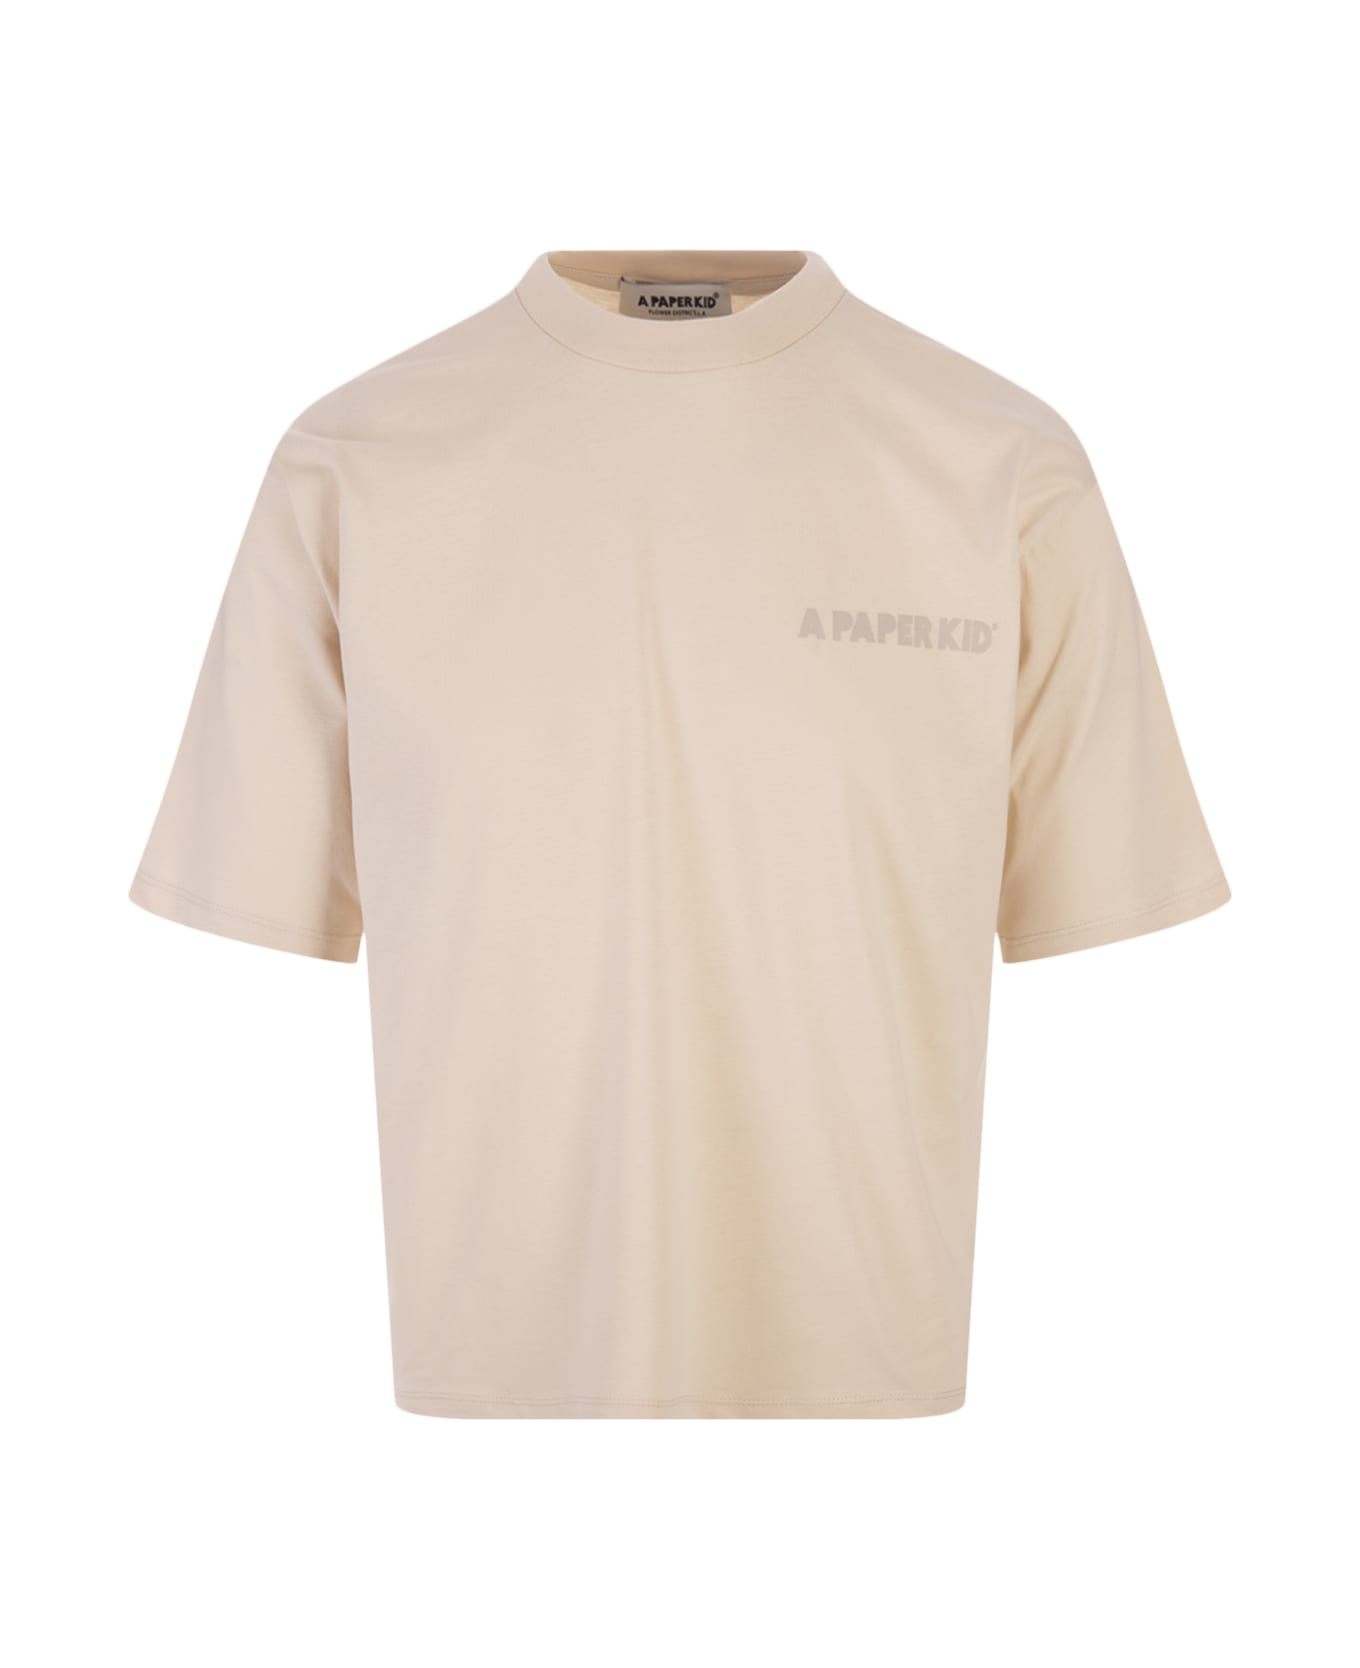 A Paper Kid Sand T-shirt With Logo - BEIGE